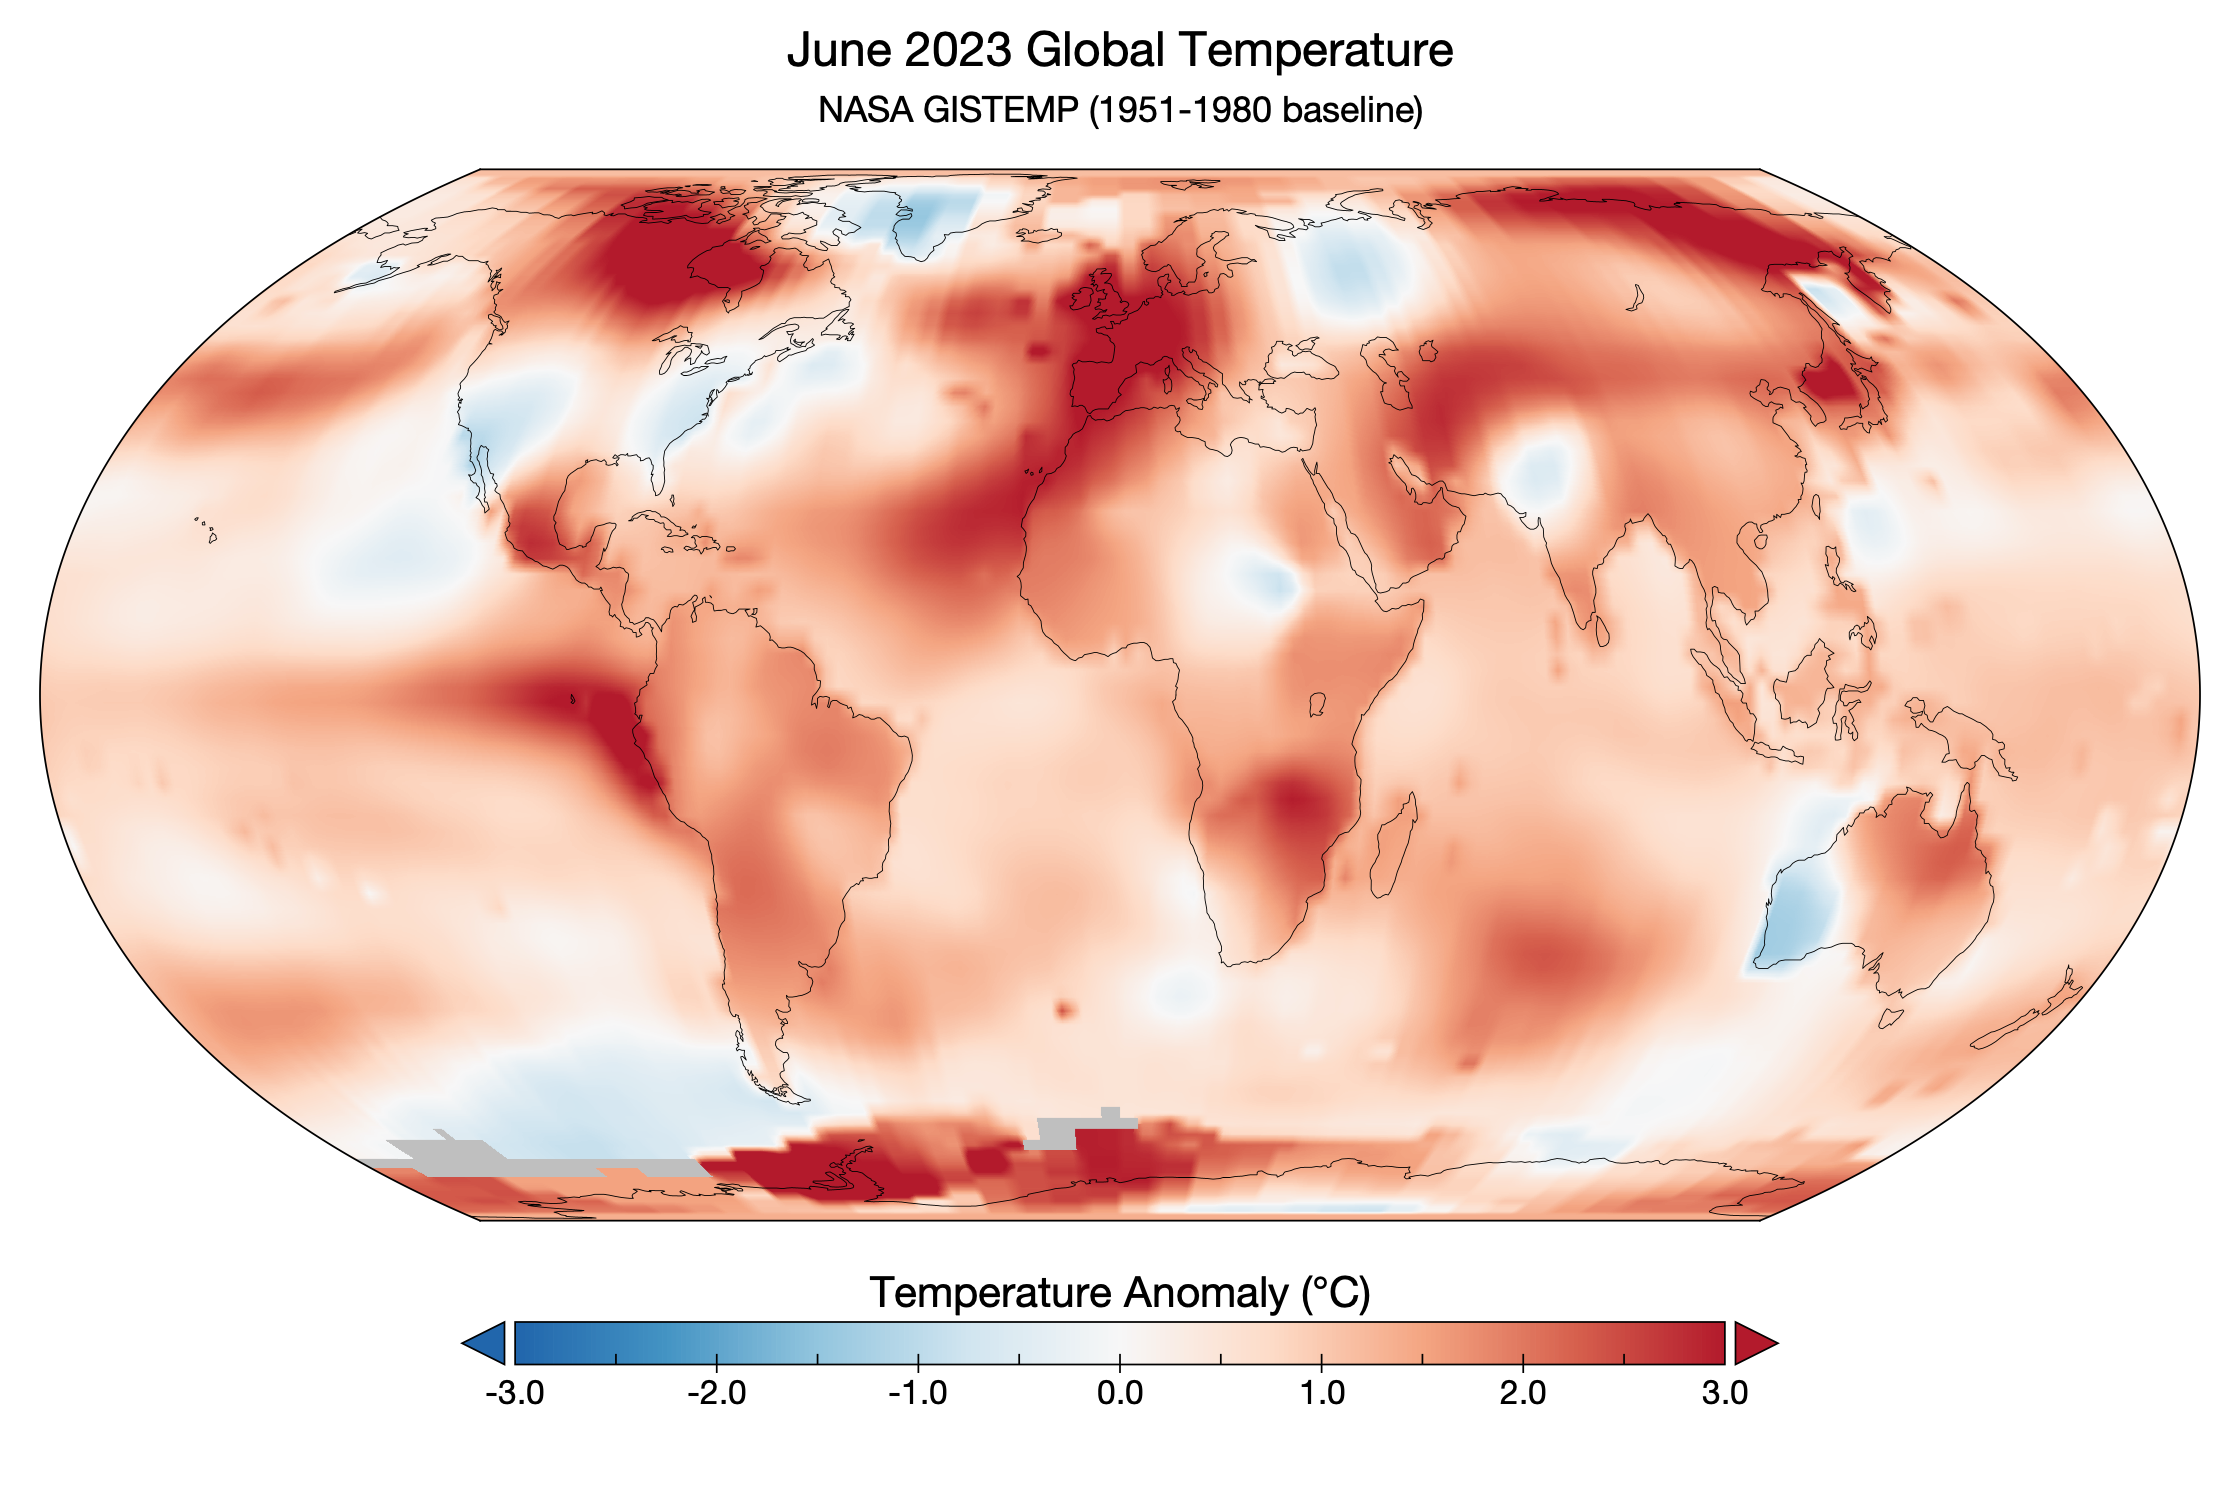 Global map of GISTEMP June surface temperature anomaly relative to the 1951-1980 June baseline. Most of the world is “red” due to warm anomalies, with the highest anomalies around Antarctica and Canada.